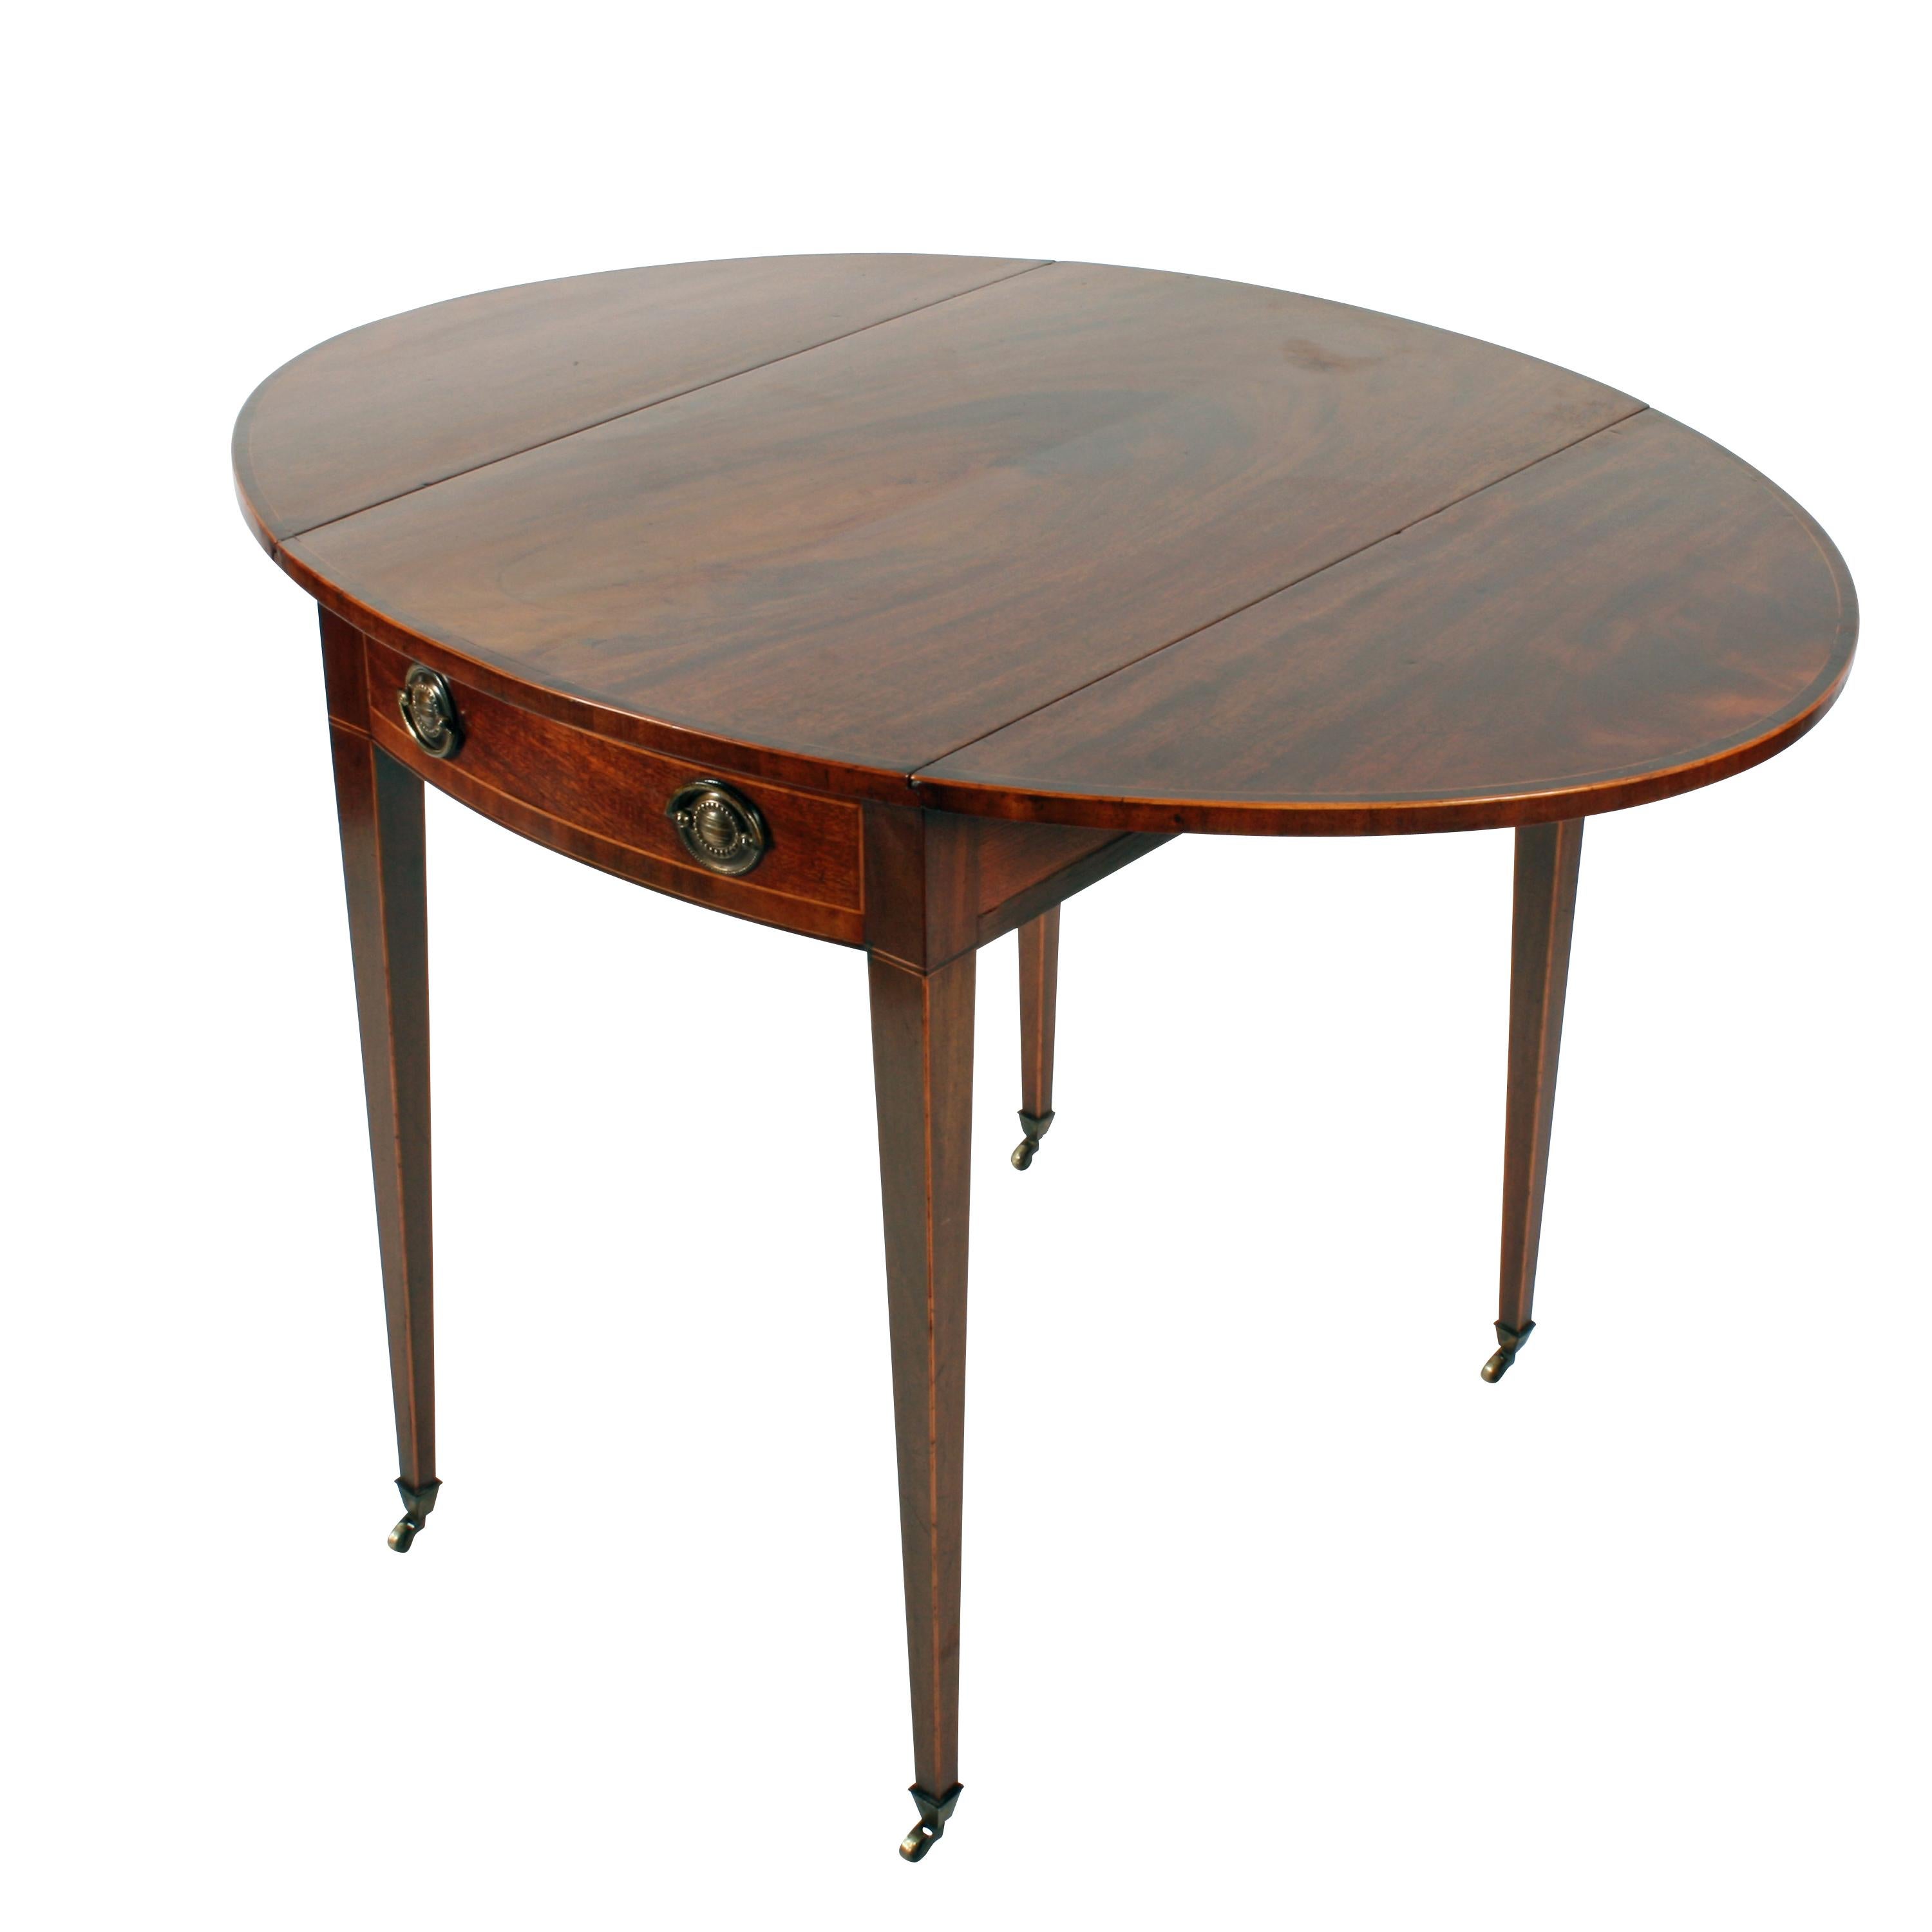 A fine late 18th century George III mahogany oval drop leaf Pembroke table.

The table has a cross banded and box wood inlaid top, a box wood edge to the legs, a single drawer and a dummy drawer.

The drawer is oak lined and has a pair of